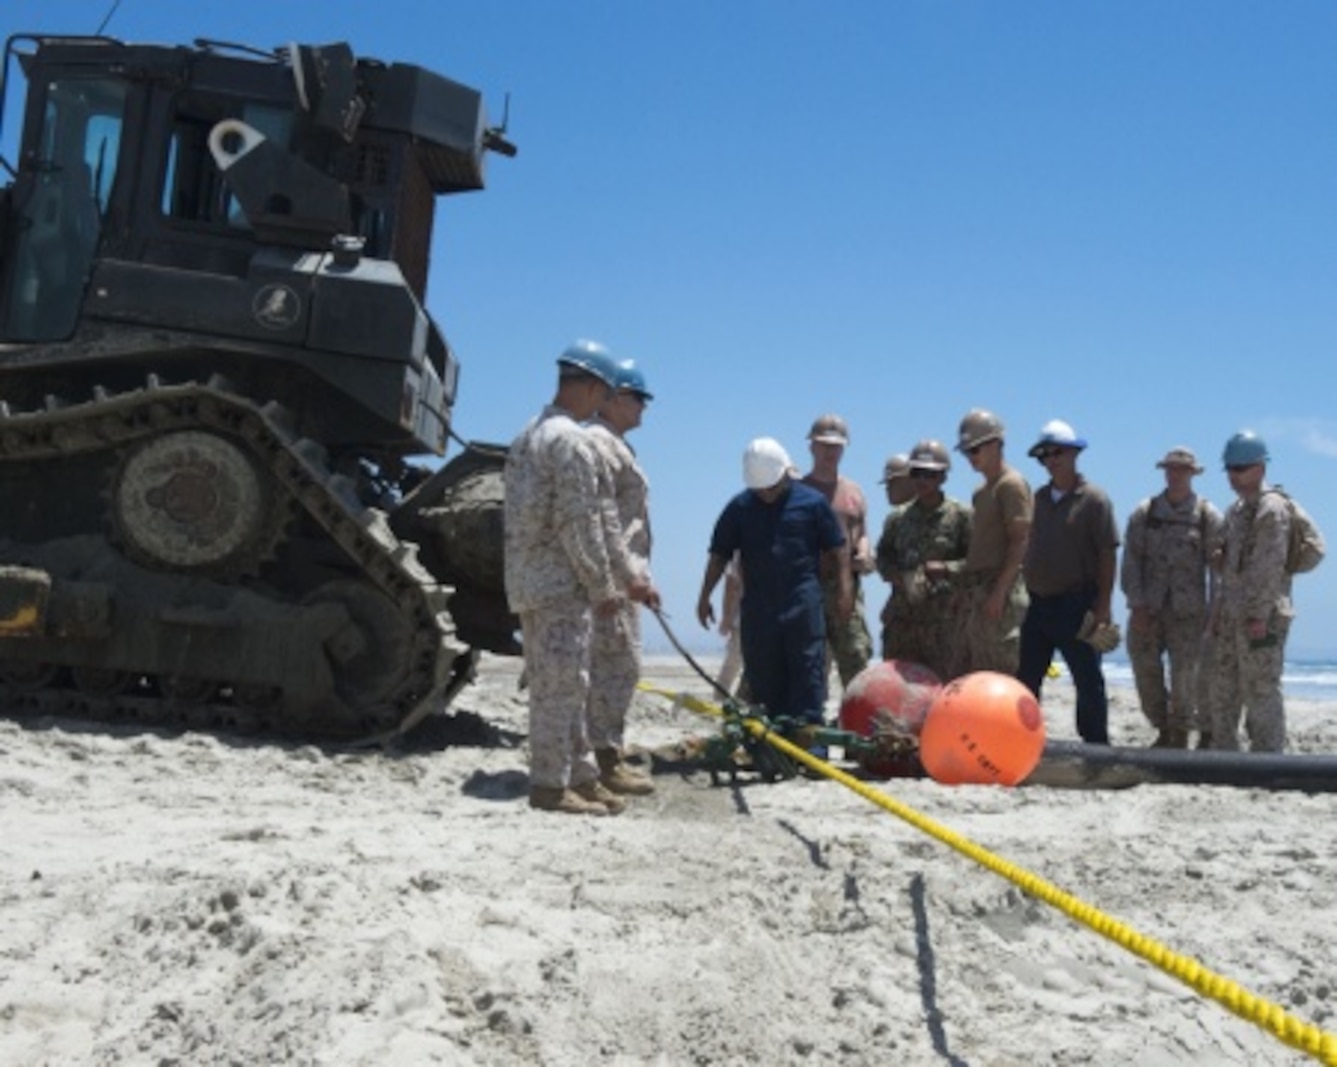 Marines with Bulk Fuel Co., 1st Marine Logistics Group, team up with Sailors from Amphibious Construction Battalion 1 to perform a beach unloading exercise using the Beach Termination Unit, in Coronado, Calif., Aug. 1-4, 2015. Approximately 30 Marines with Bulk Fuel Company, 7th Engineer Support Battalion, 1st Marine Logistics Group, teamed up with Sailors from Amphibious Construction Battalion 1 to conduct a beach unloading exercise. What made the training unique was the use of the BTU, which allows Marines to transfer fuel from a ship out in the ocean to Marines on land.